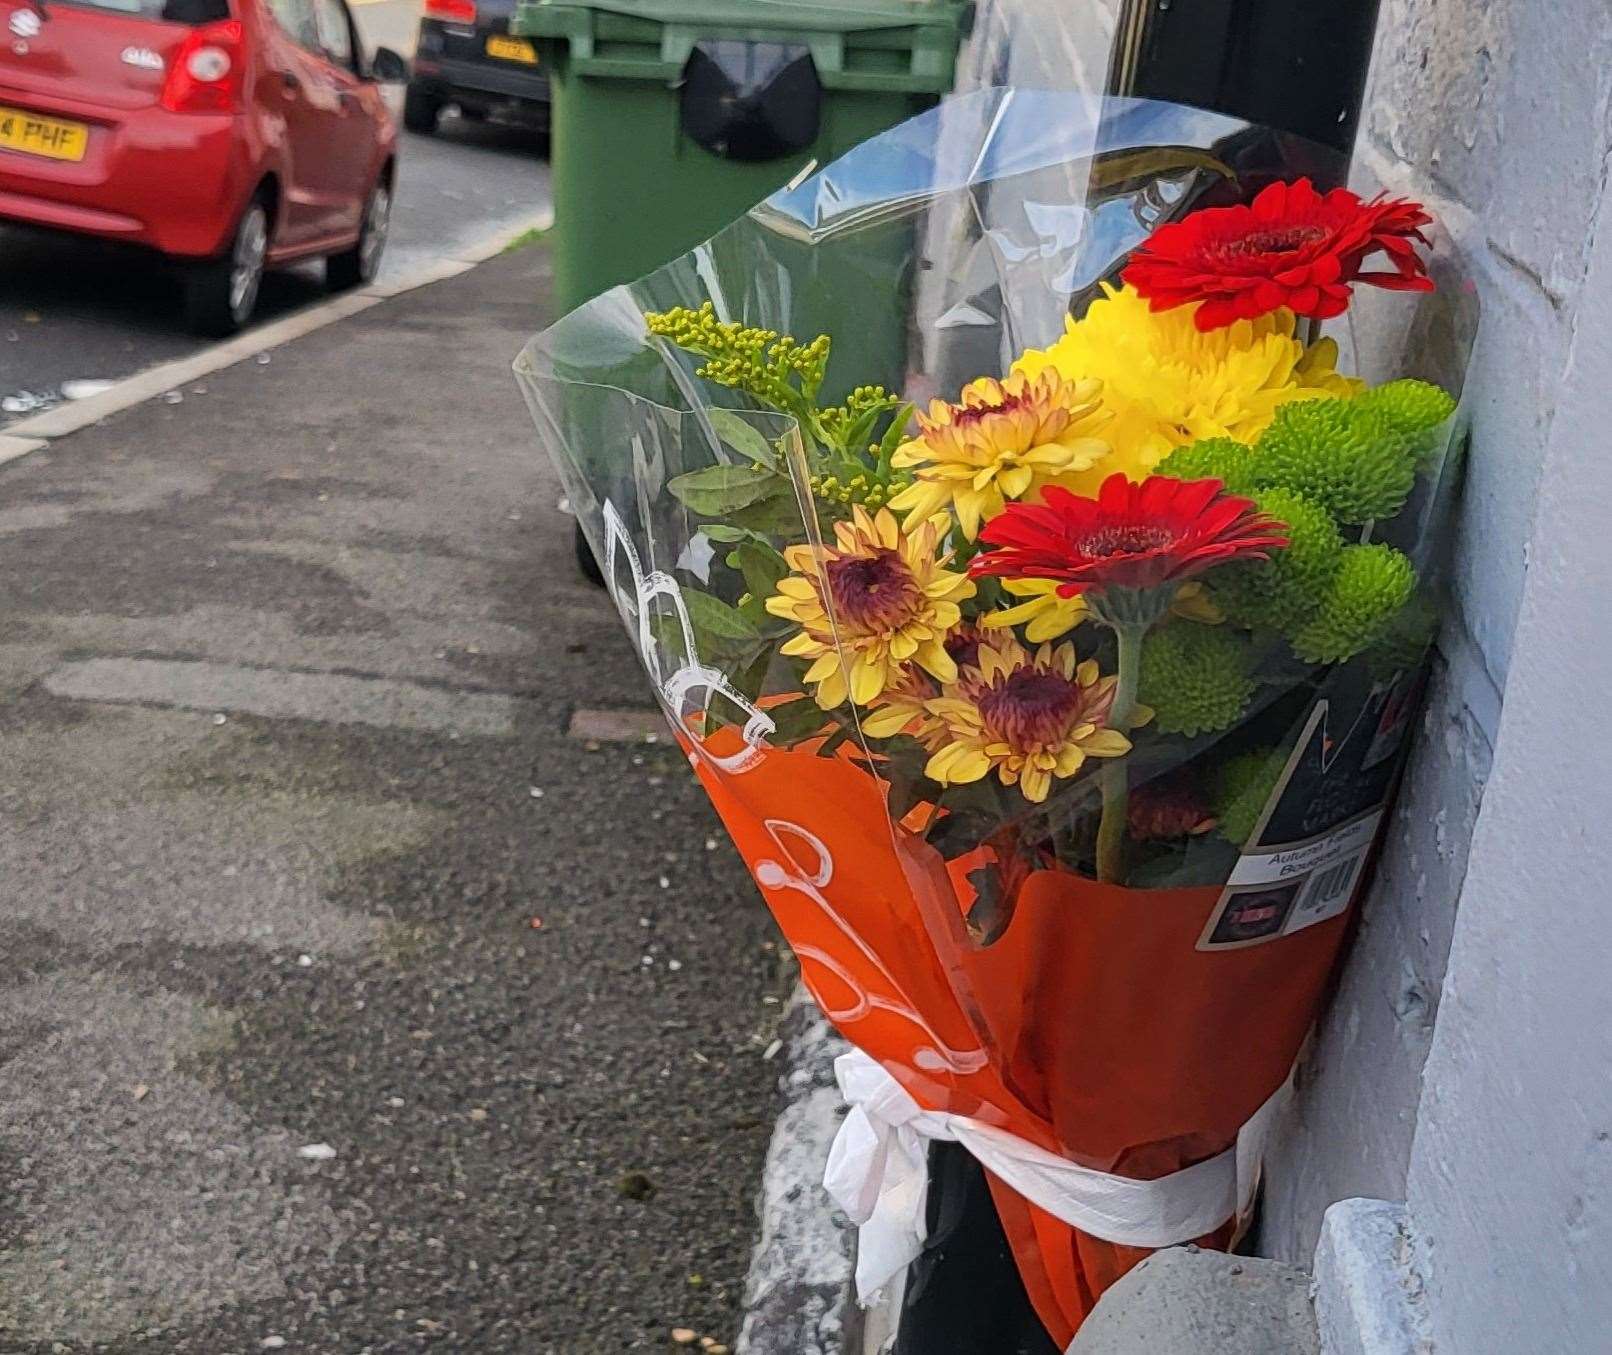 A floral tribute was placed at the scene of the fatal attack in Folkestone